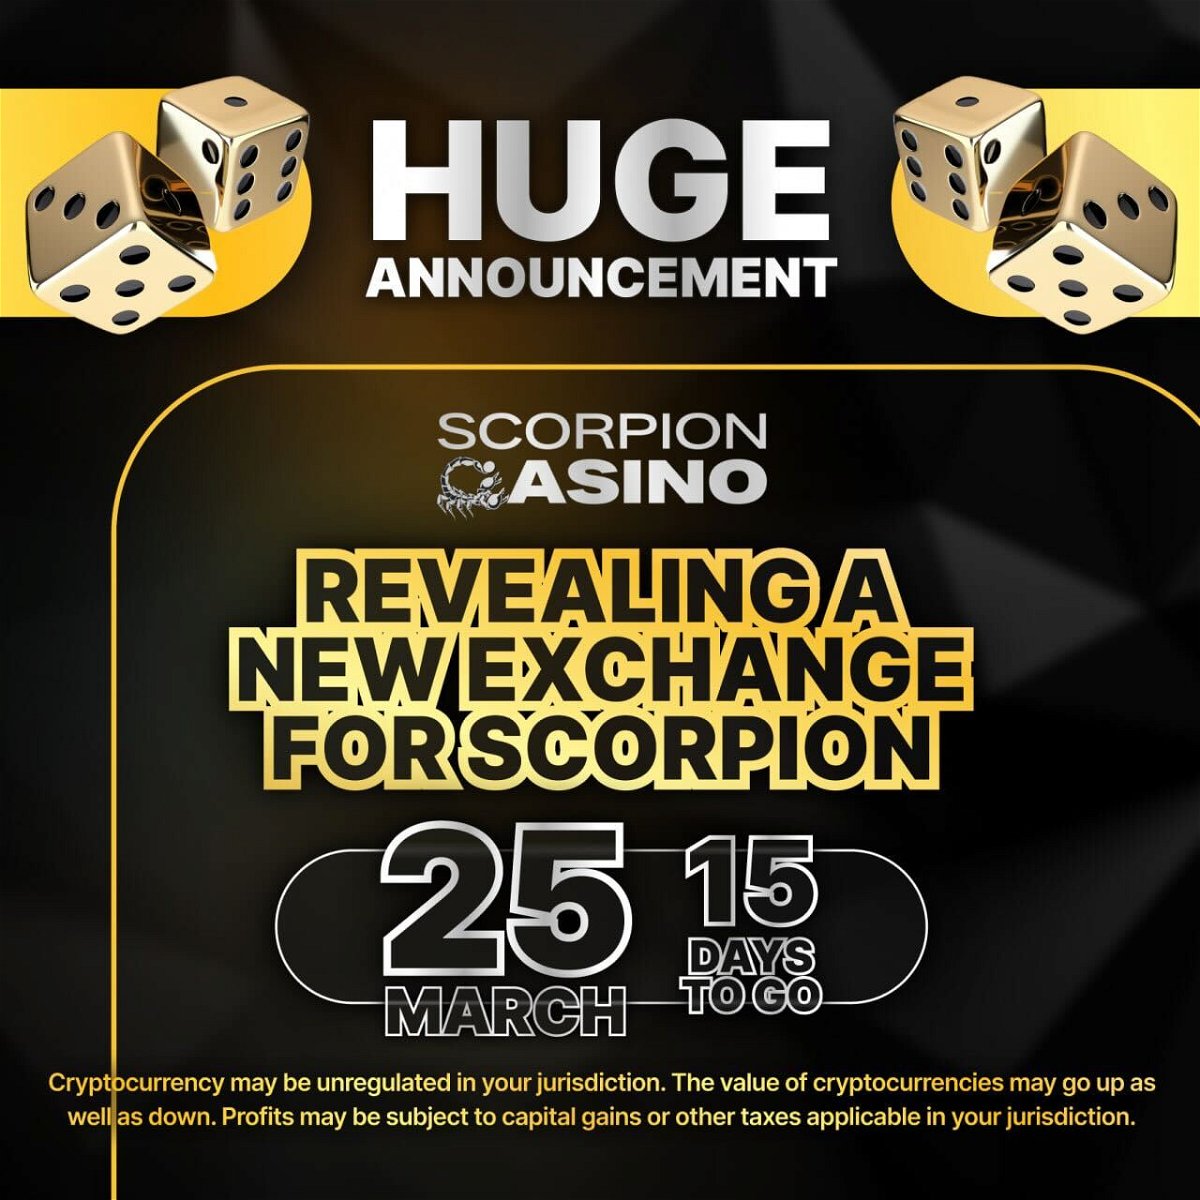 black background with 2 gold dice either side at heading for Scorpion Casino